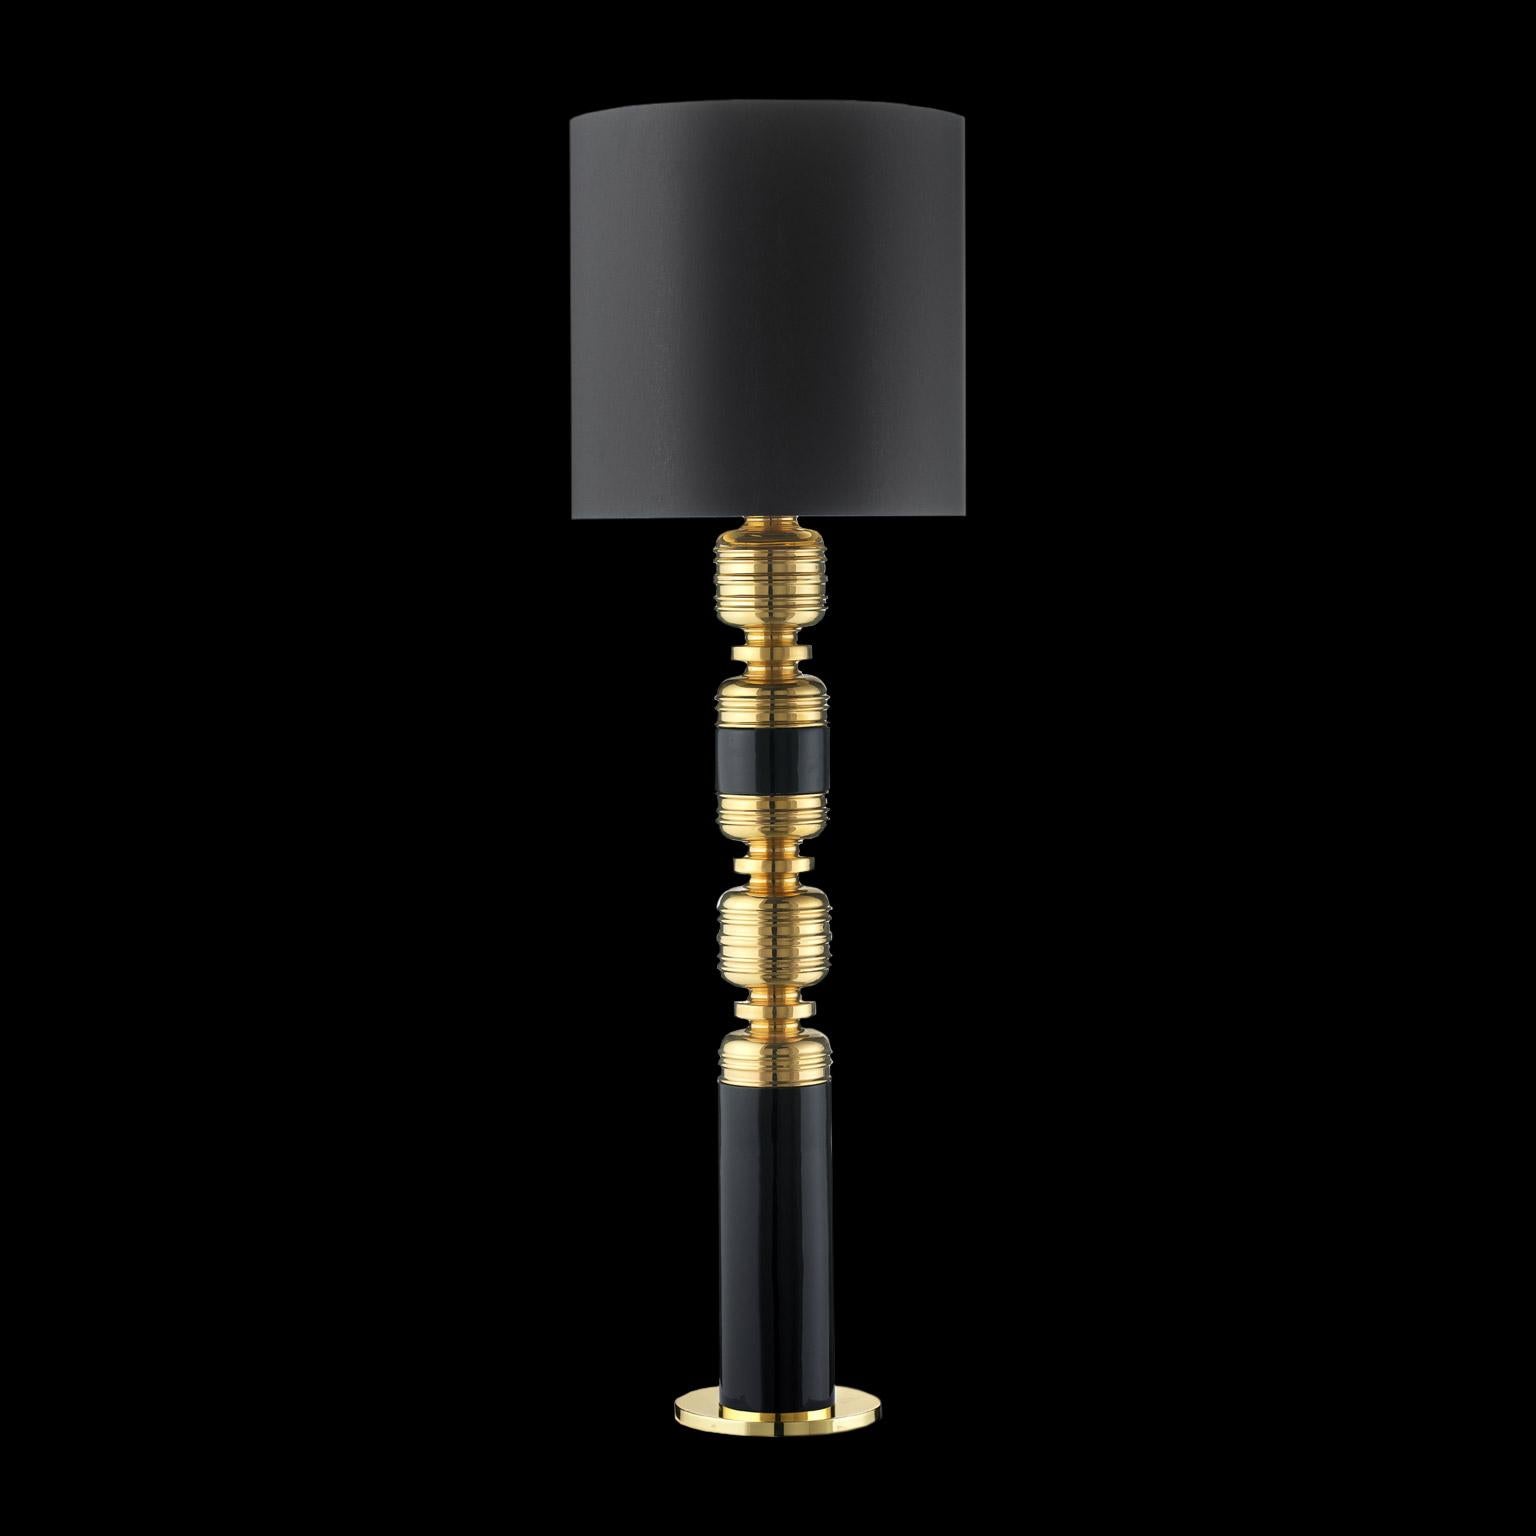 Ceramic lamp THEA 5
cod. LT005
handcrafted in 24-karat gold 
in combinatin with black enamel 
with cotton lampshade

measures:
H. 155.0 cm.
Dm. 40.0 cm.